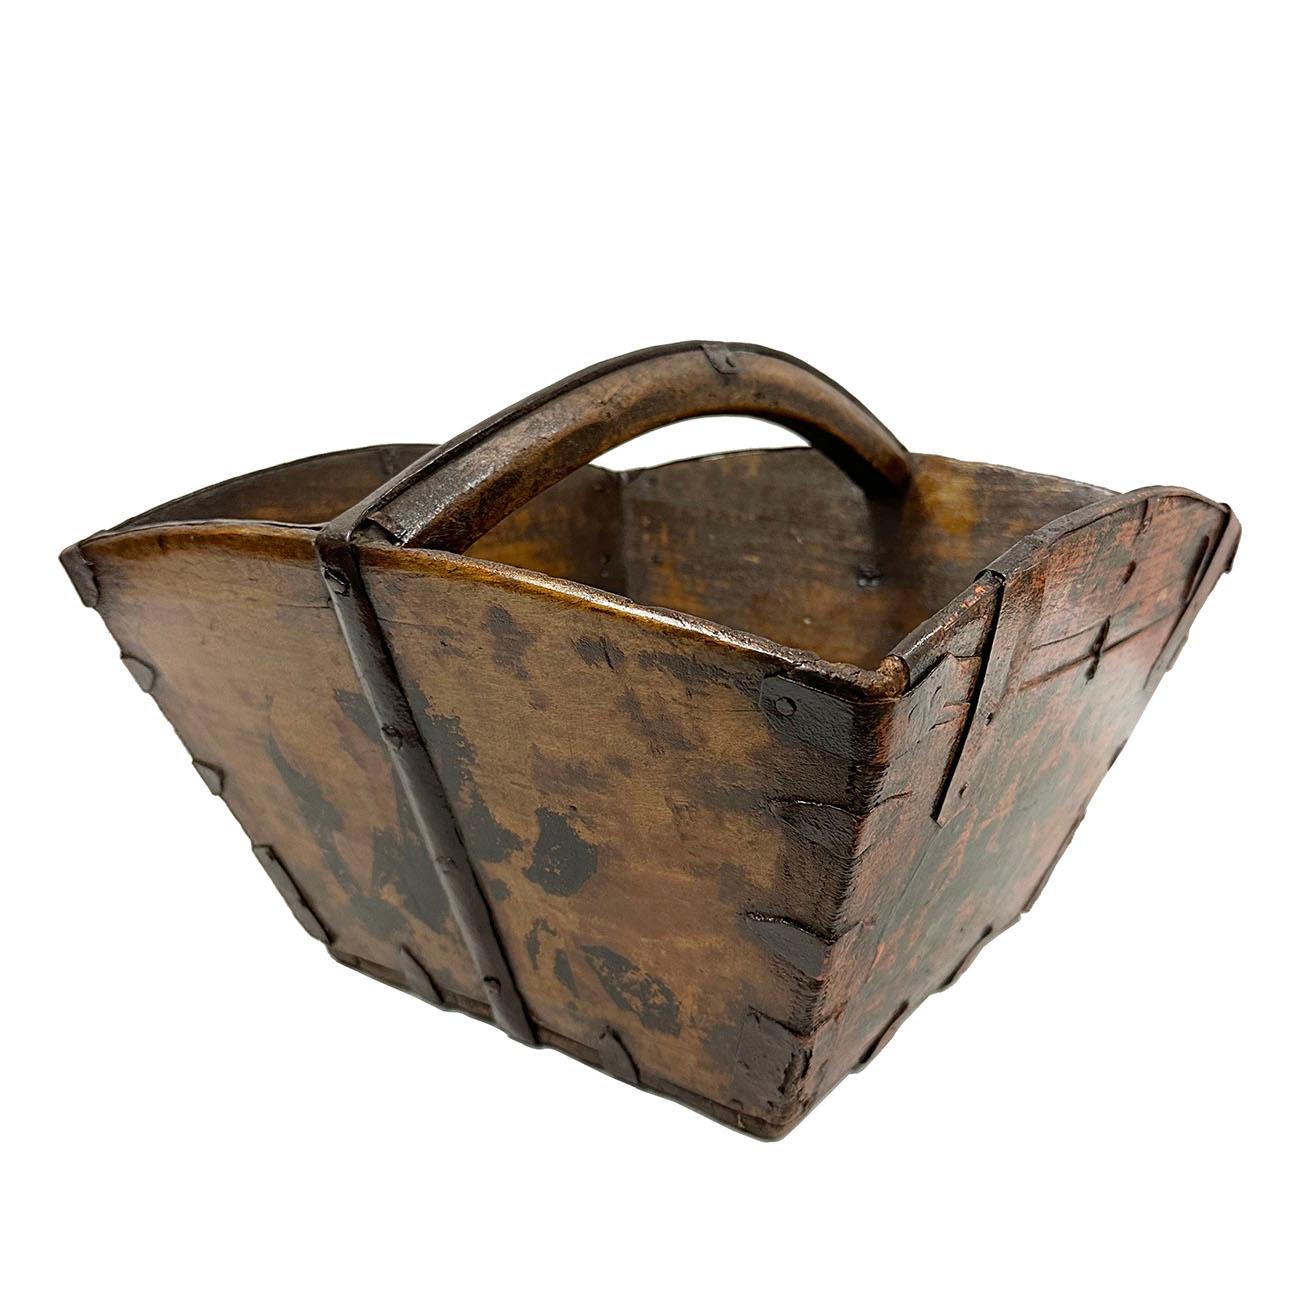 Hand-Painted 19th Century Antique Chinese Wooden Rice Measure Bucket, Dou For Sale